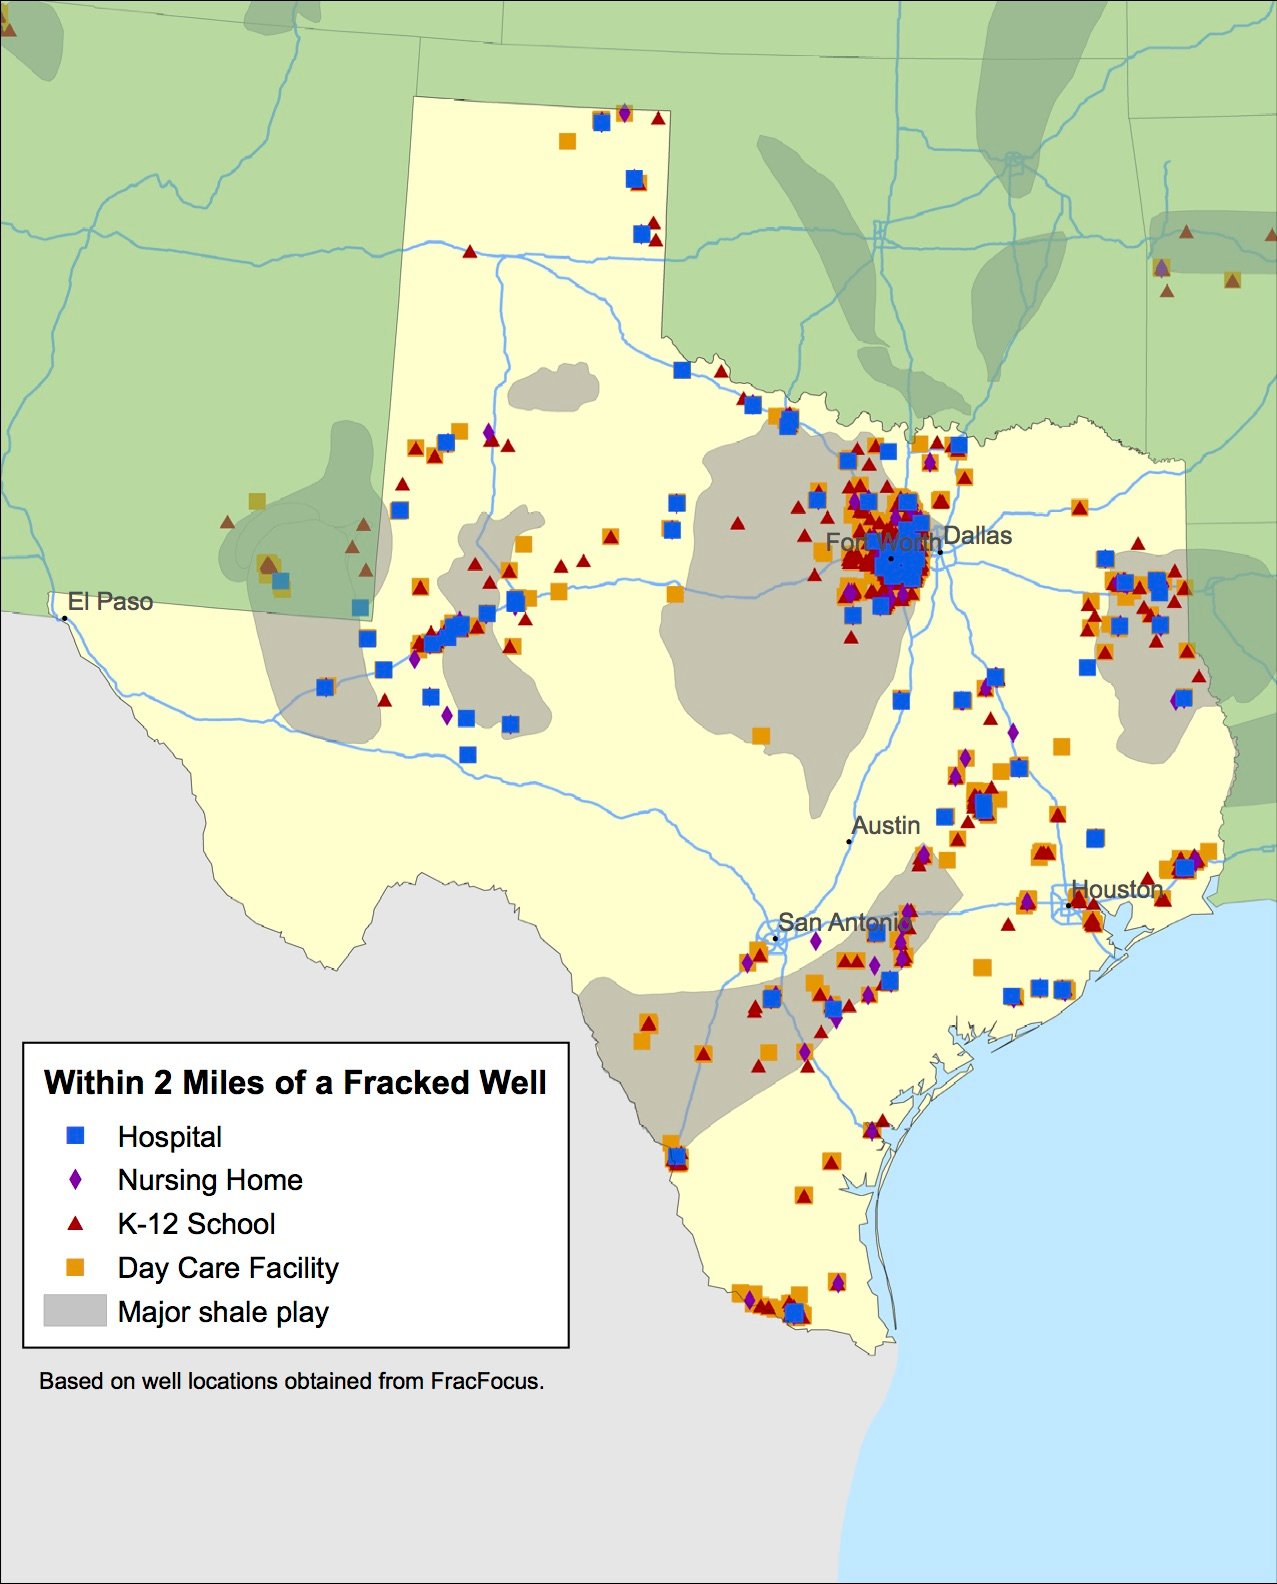 Hospitals, nursing homes and schools in Texas in close proximity to fracking operations put children at particular risk, say environmental groups.